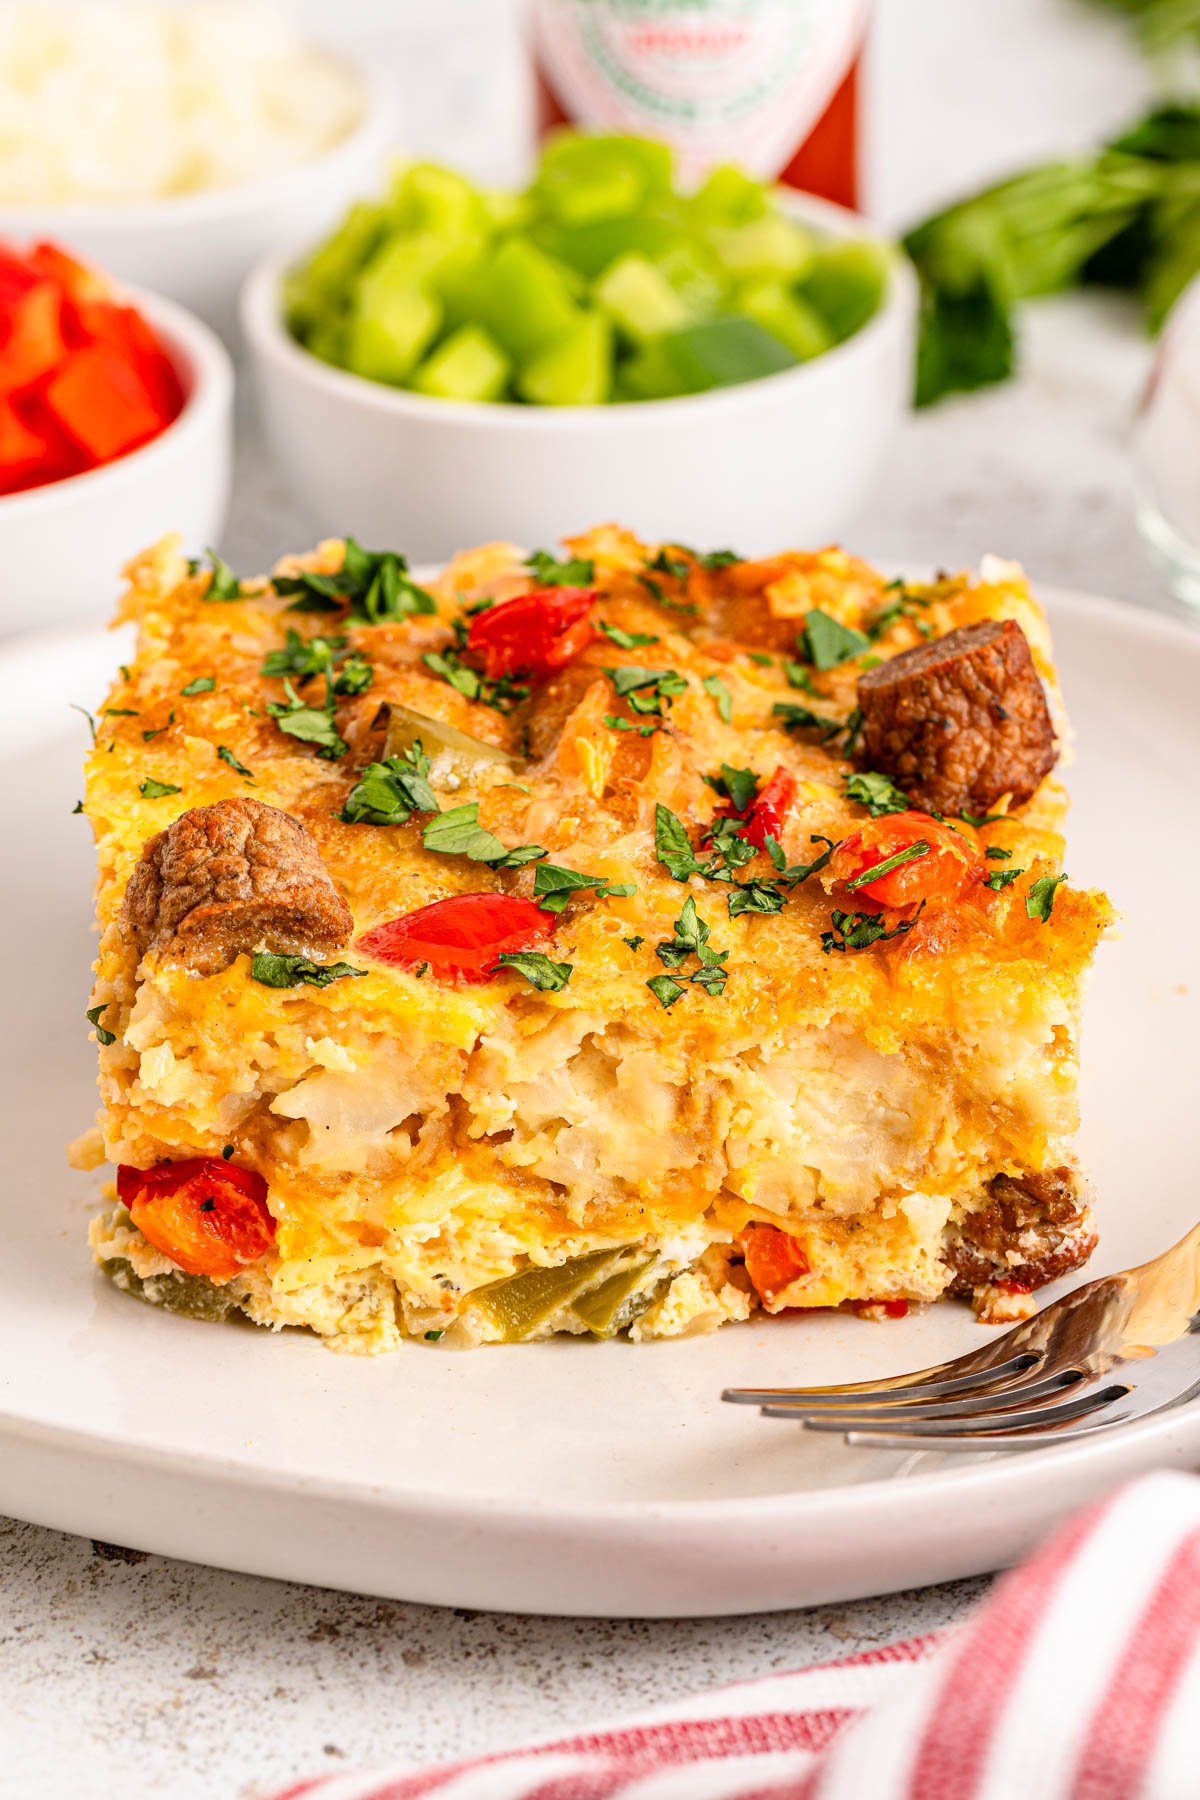 A slice of a breakfast casserole with vegetables and sausage on a plate, garnished with fresh herbs.